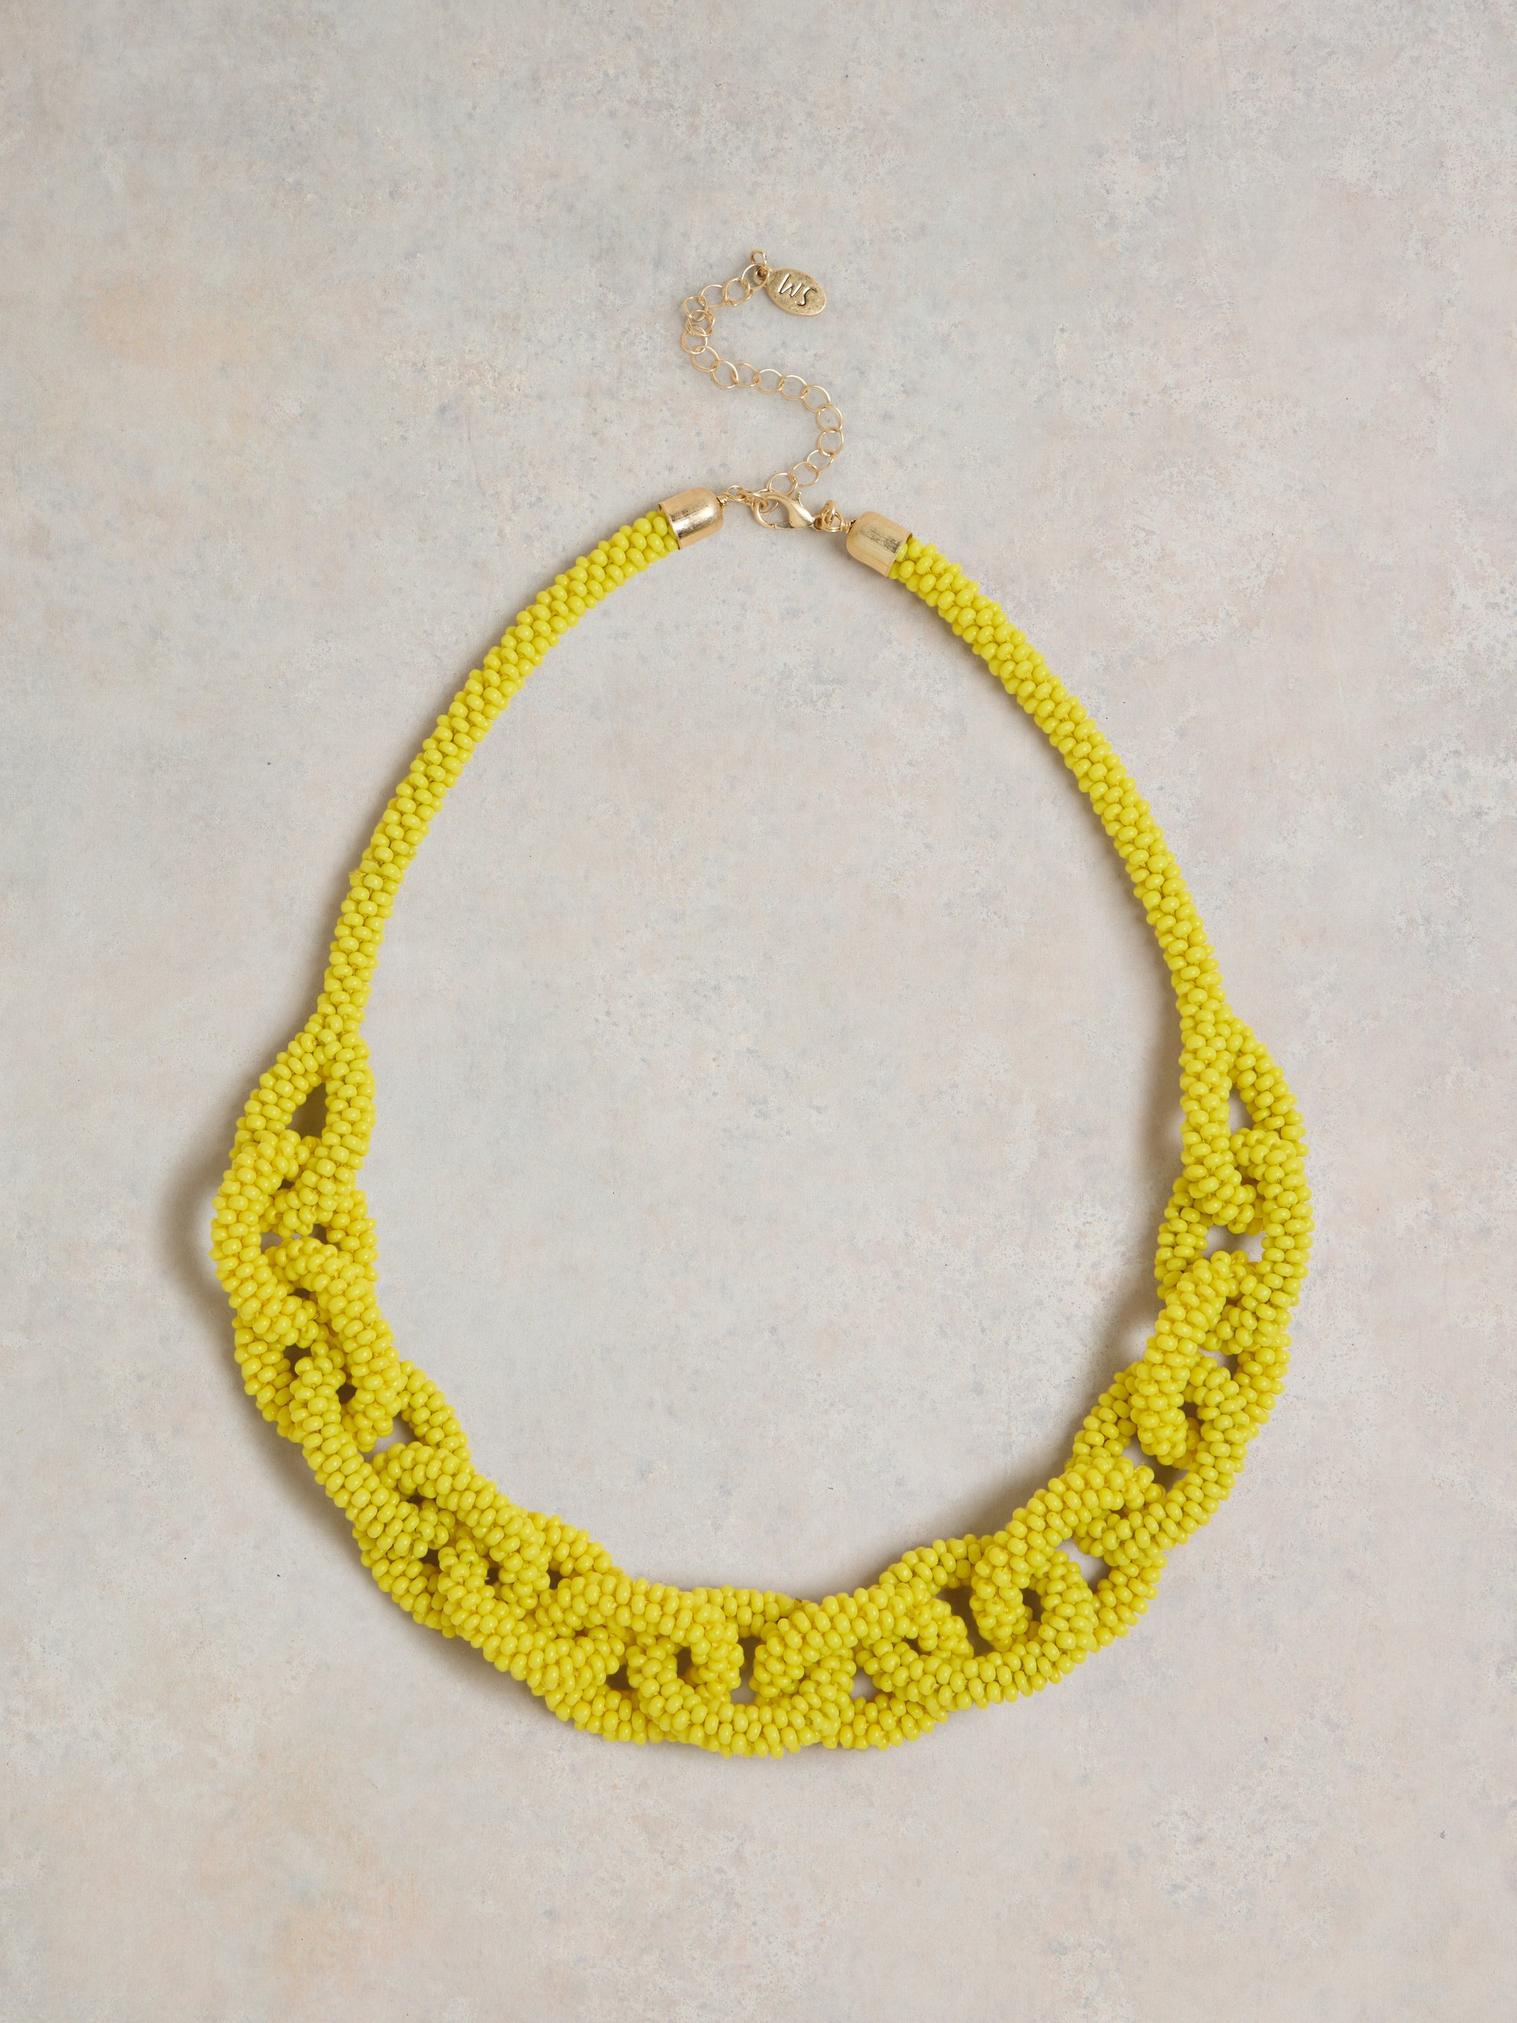 Fine Bead Link Necklace in BRT YELLOW - FLAT FRONT